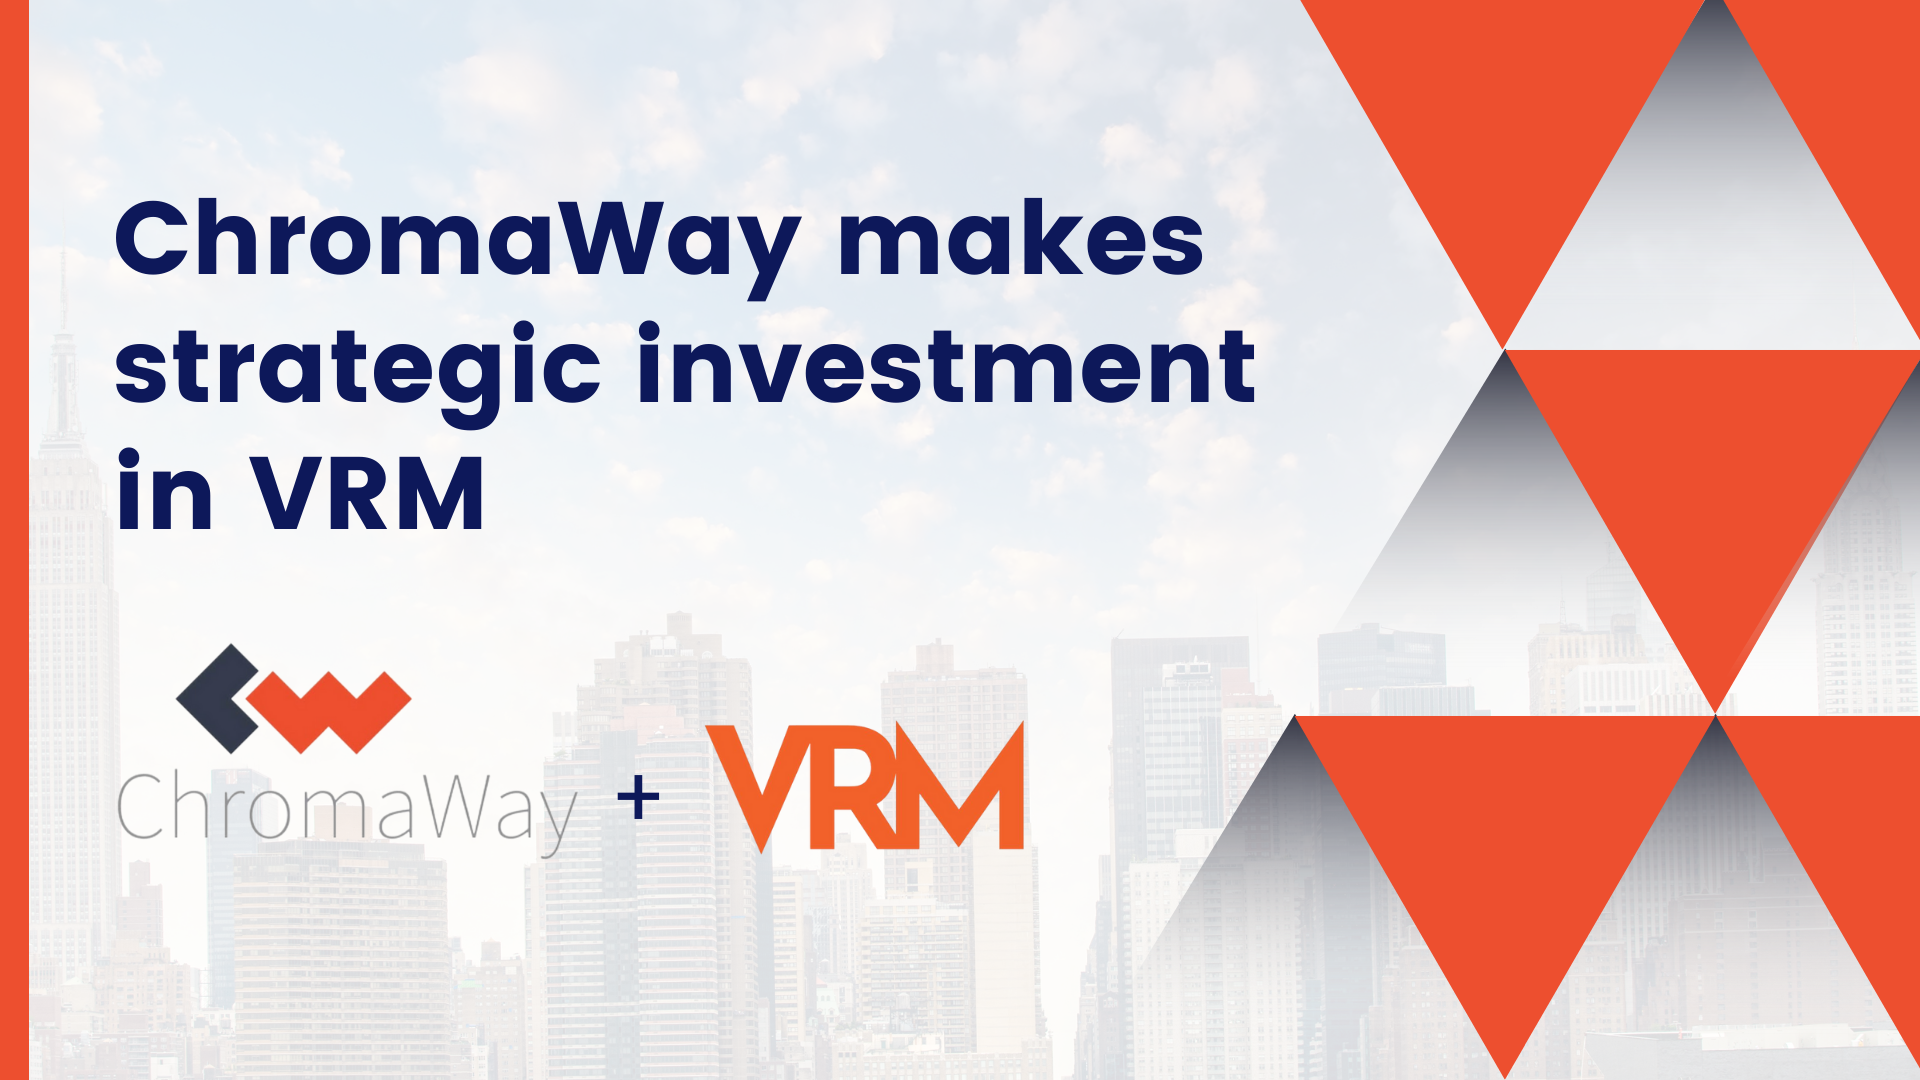 ChromaWay makes strategic investment in VRM